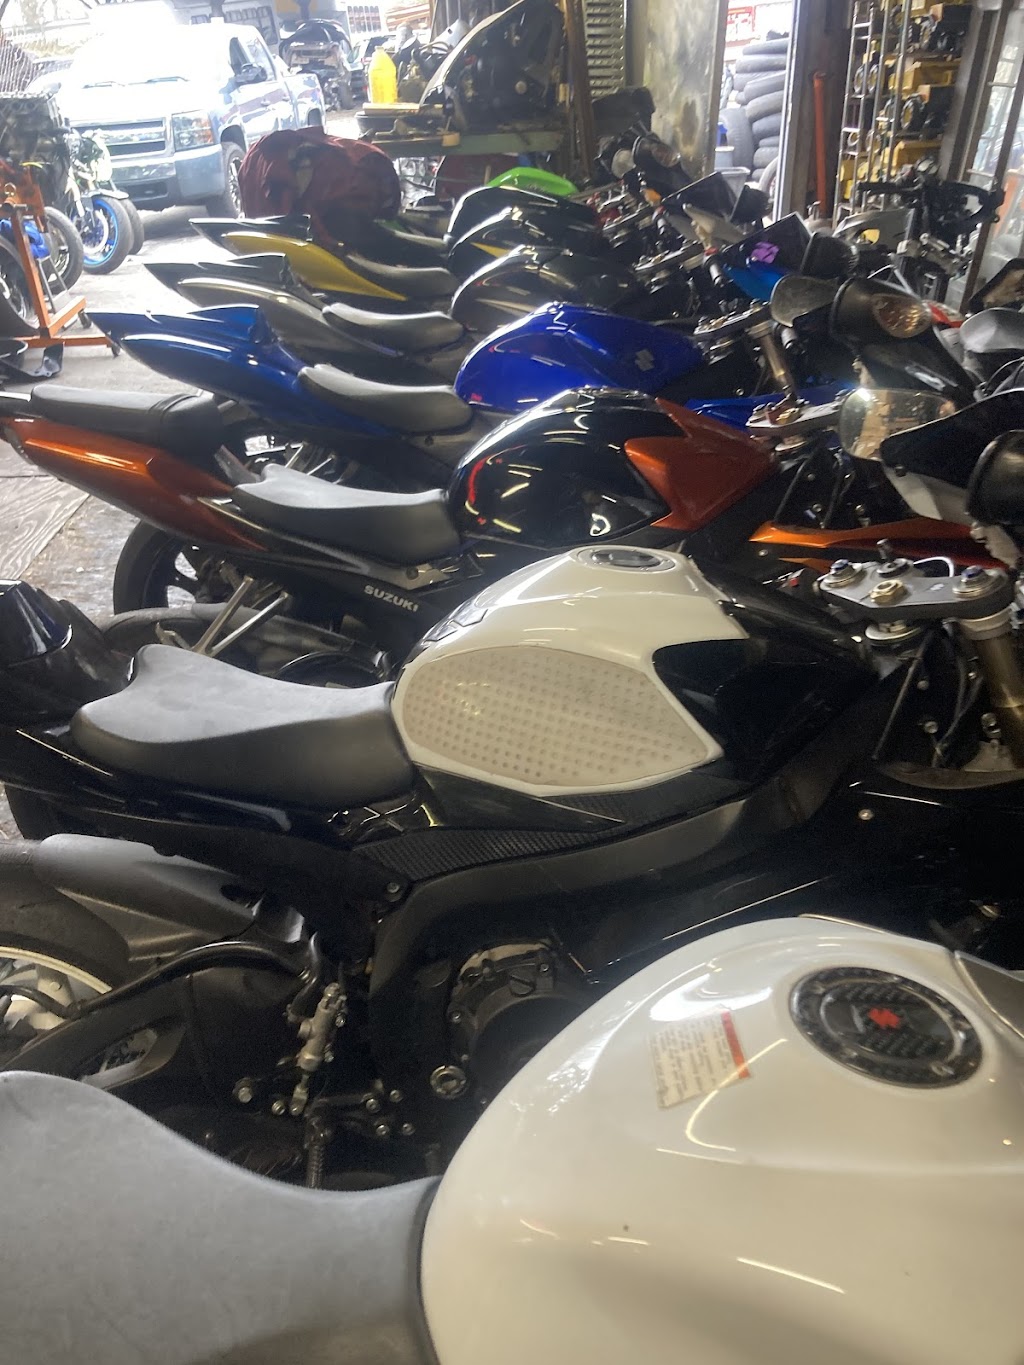 The Shop Motorcycle sales parts repair | 75 N Barclay St, Paterson, NJ 07503 | Phone: (973) 592-2823